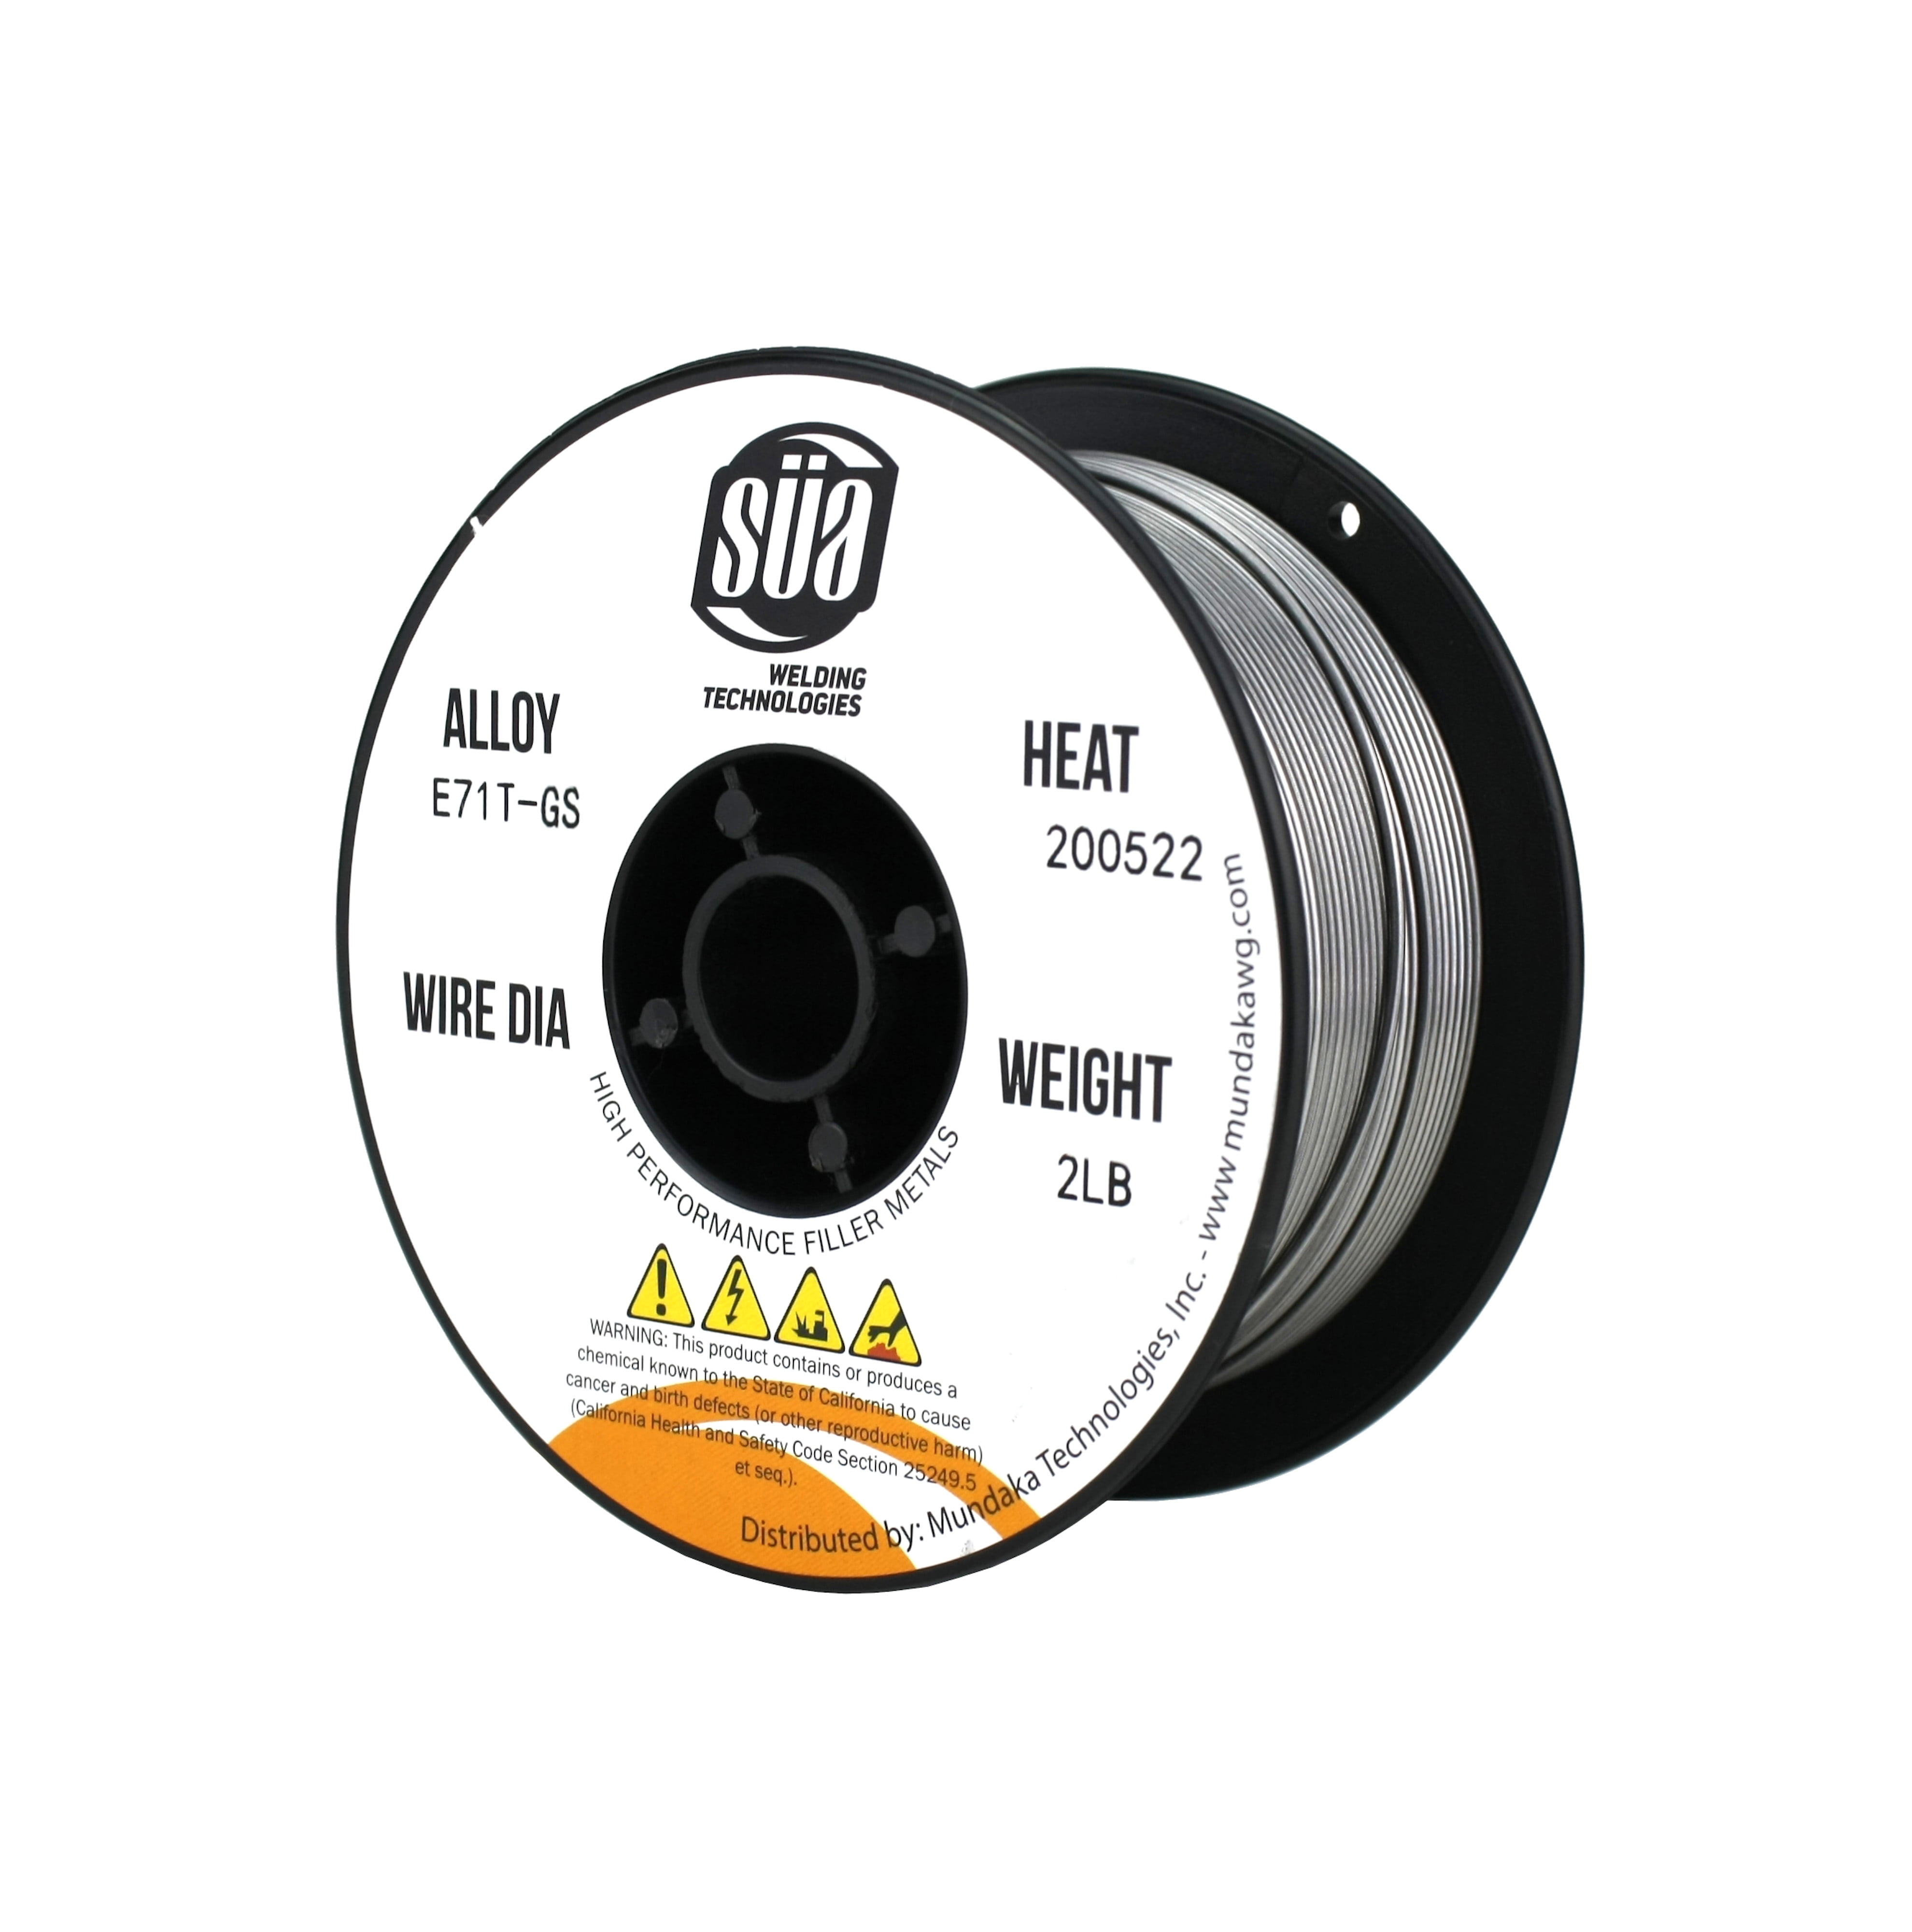 MTNWEW-6231 Industrial Products & Tools 8 Spool Billion_Store by .030 Flux-Cored E71T-GS Welding Wire